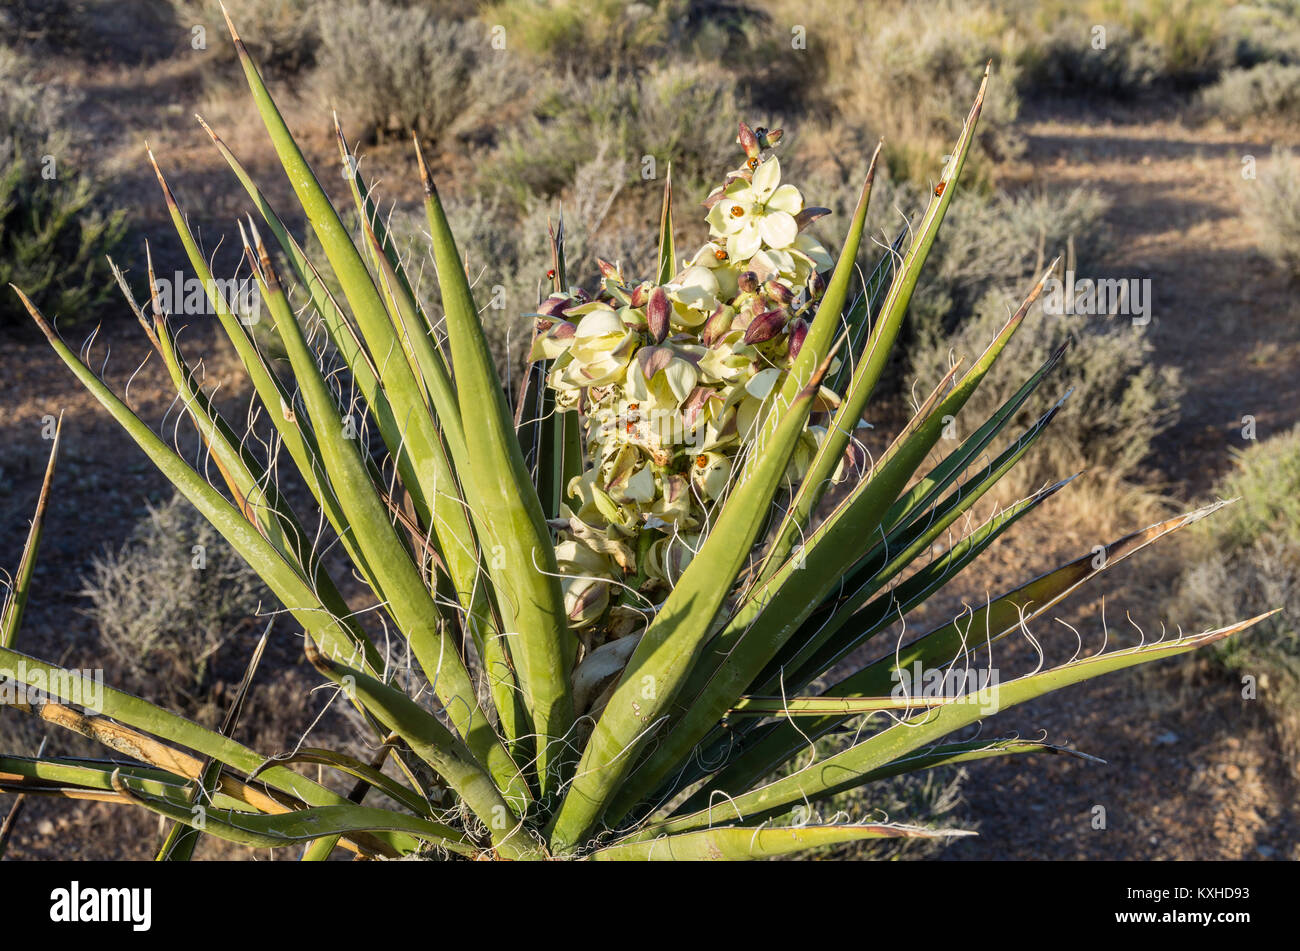 Mojave Yucca or Yucca schidigera blooming in the Red Rock Canyon Mational Conservation Area Stock Photo